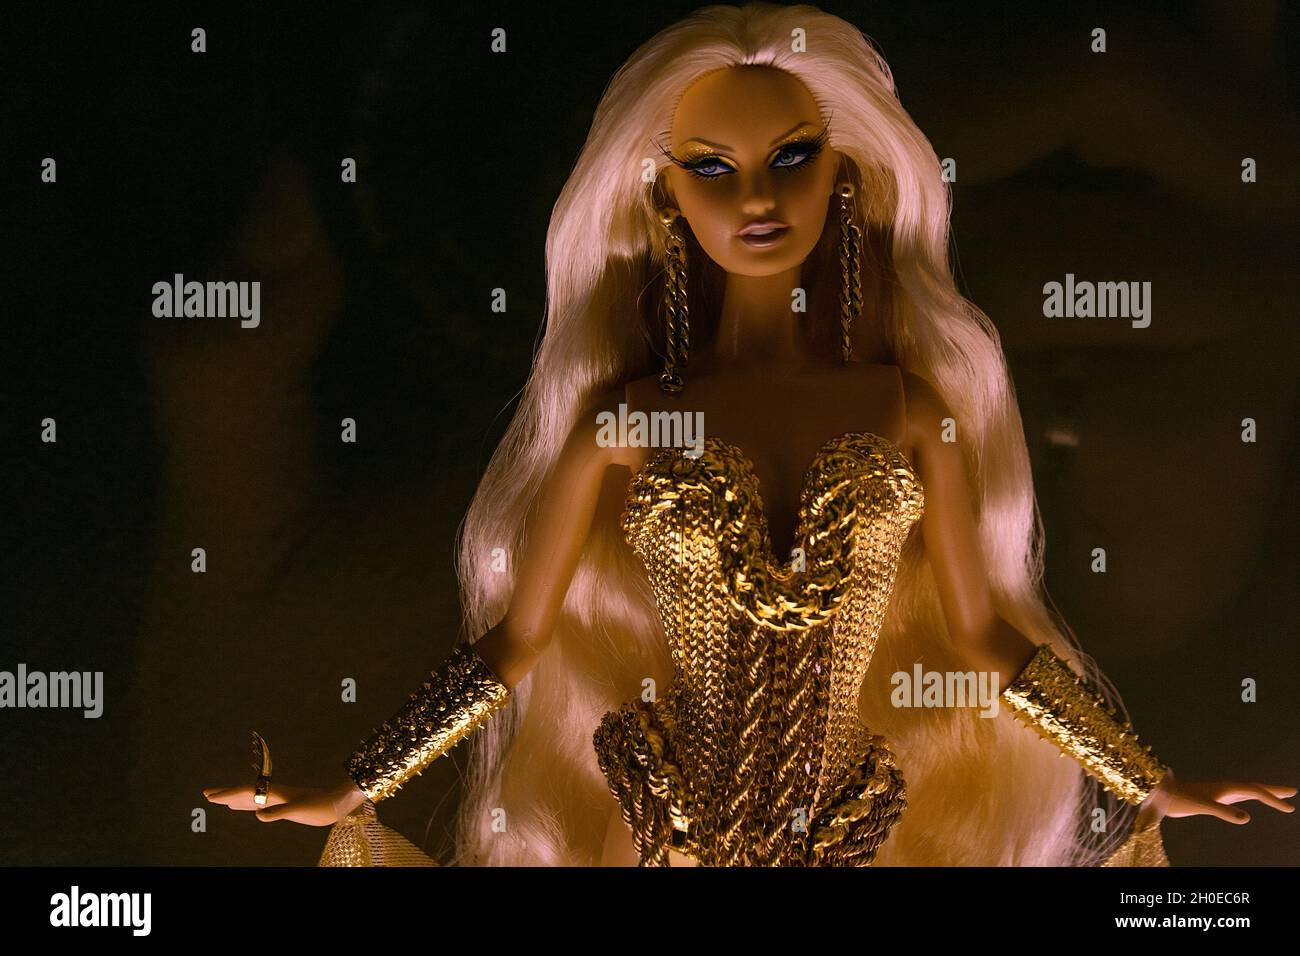 Blonds Blond Gold Barbie exposition at Mudec museum in Milan, Italy Stock Photo